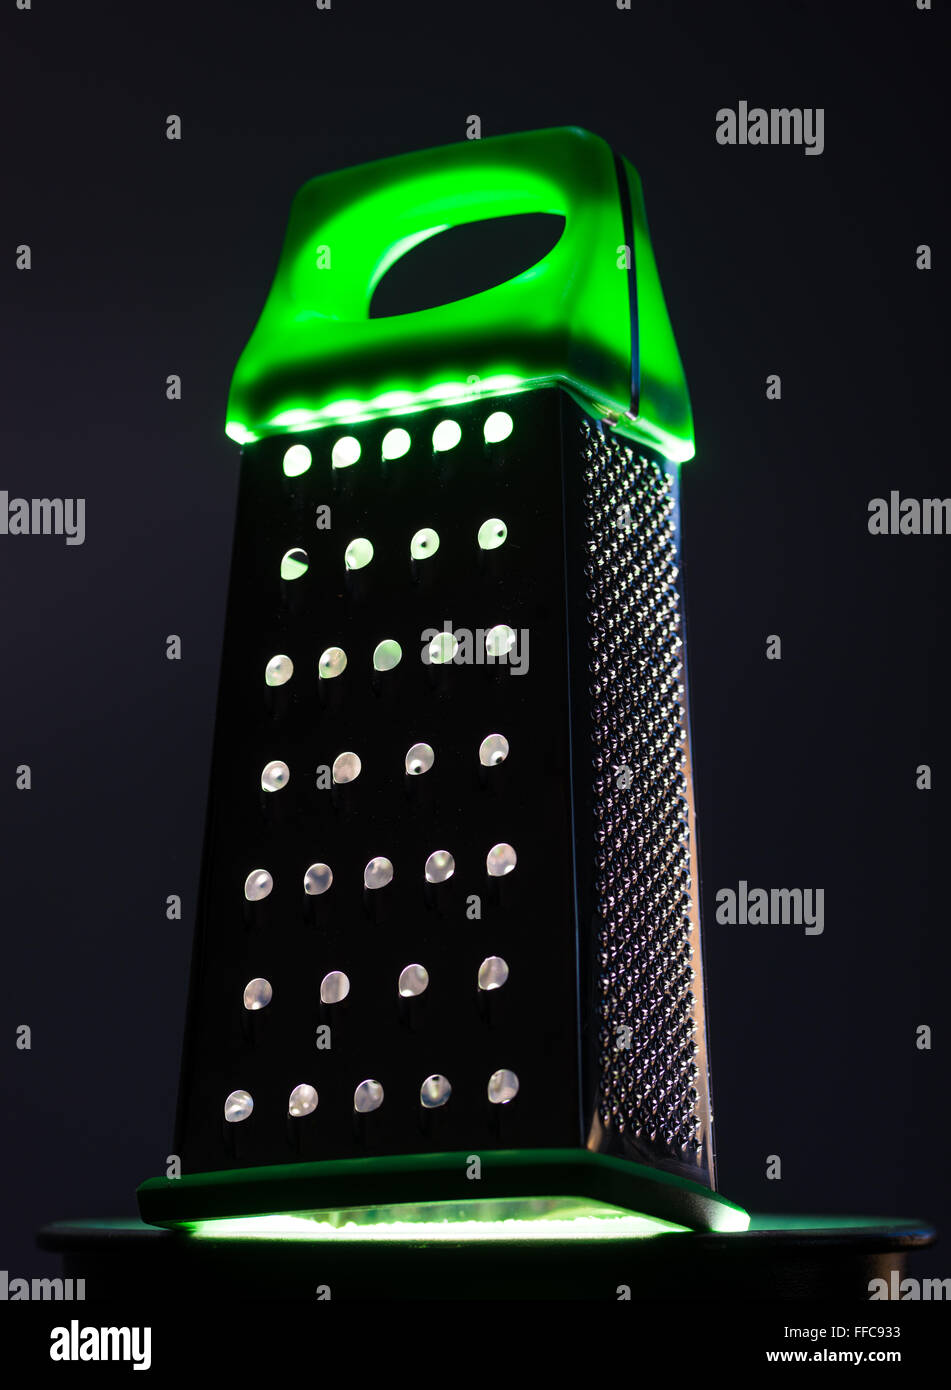 Food grater with green handle Stock Photo